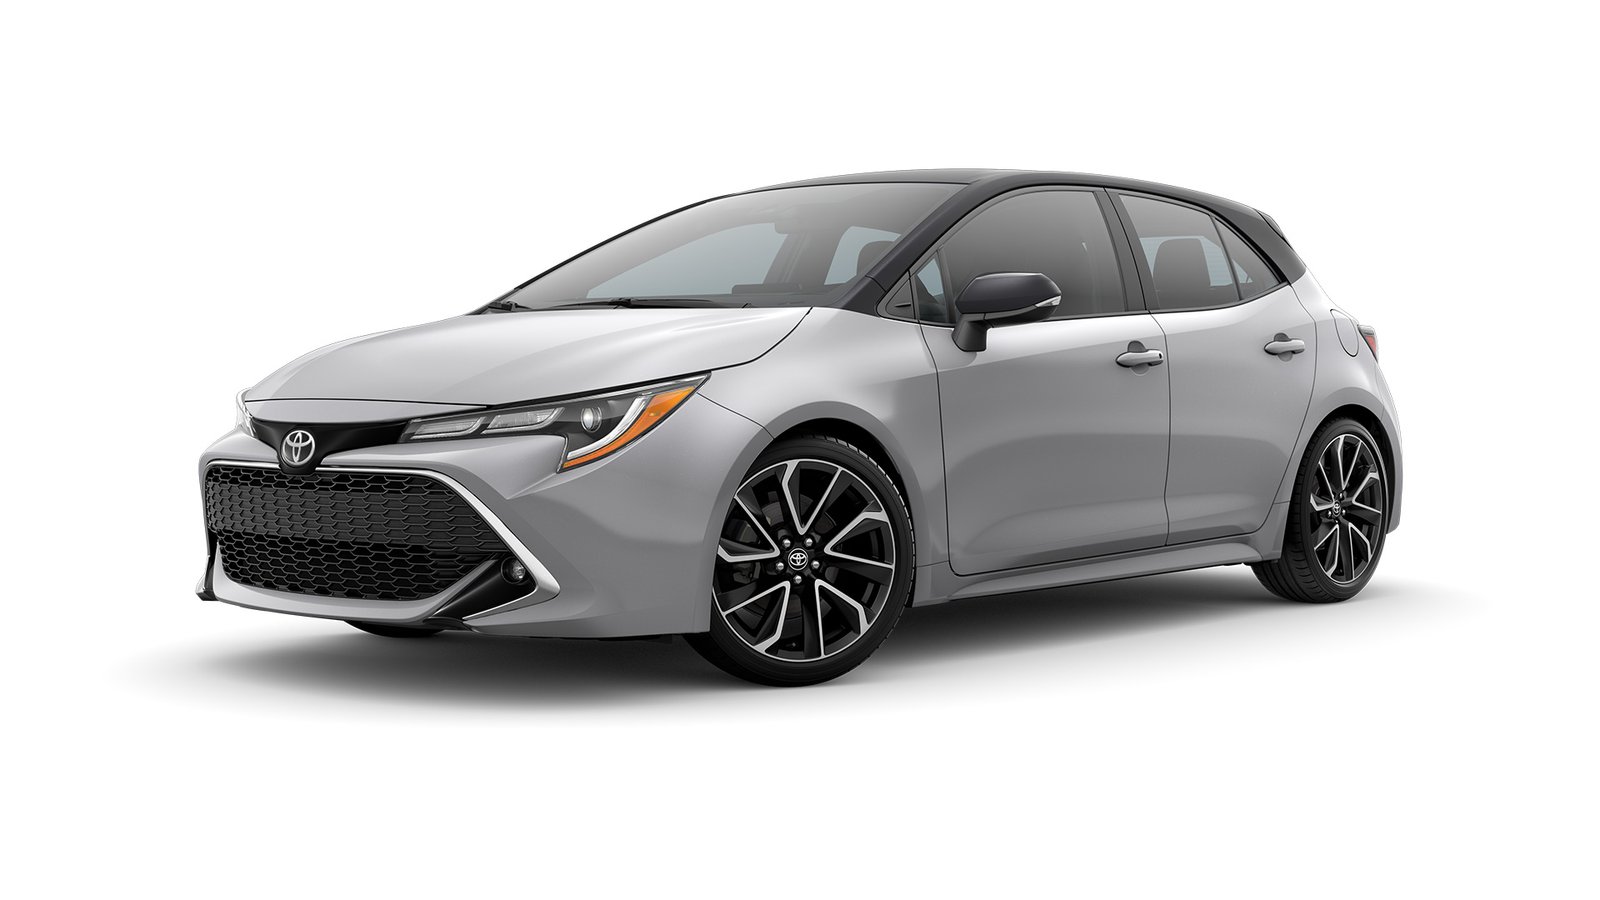 2022 Toyota Corolla Hatchback Classic Silver Metallic with Black Roof